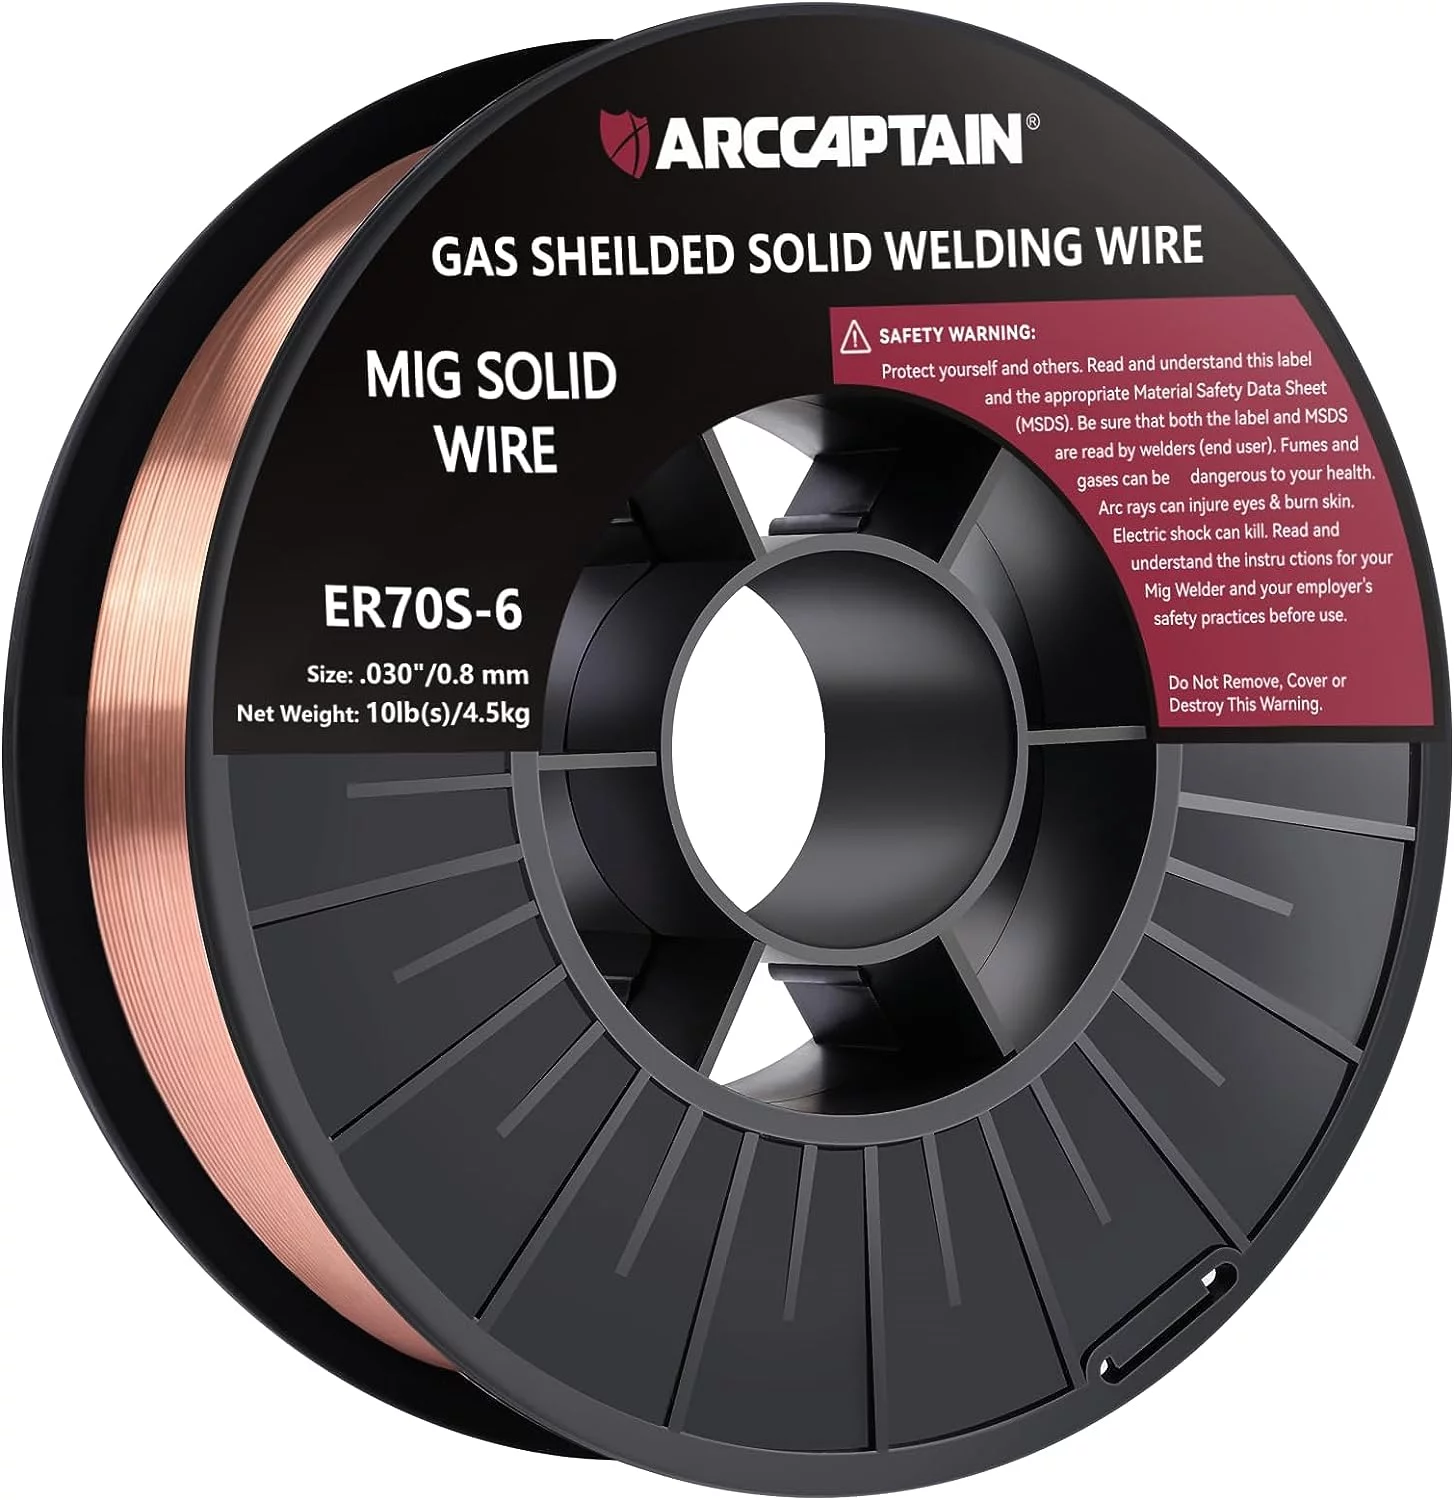 ARCCAPTAIN Welding Wire MIG, 030 Mig Wire ER70S-6 10Lbs Gas Solid Carbon Steel Low Splatter & High Levels of Deoxidizers Mig Welding Wire Compatible With Lincoln Miller Forney Harbor Welder